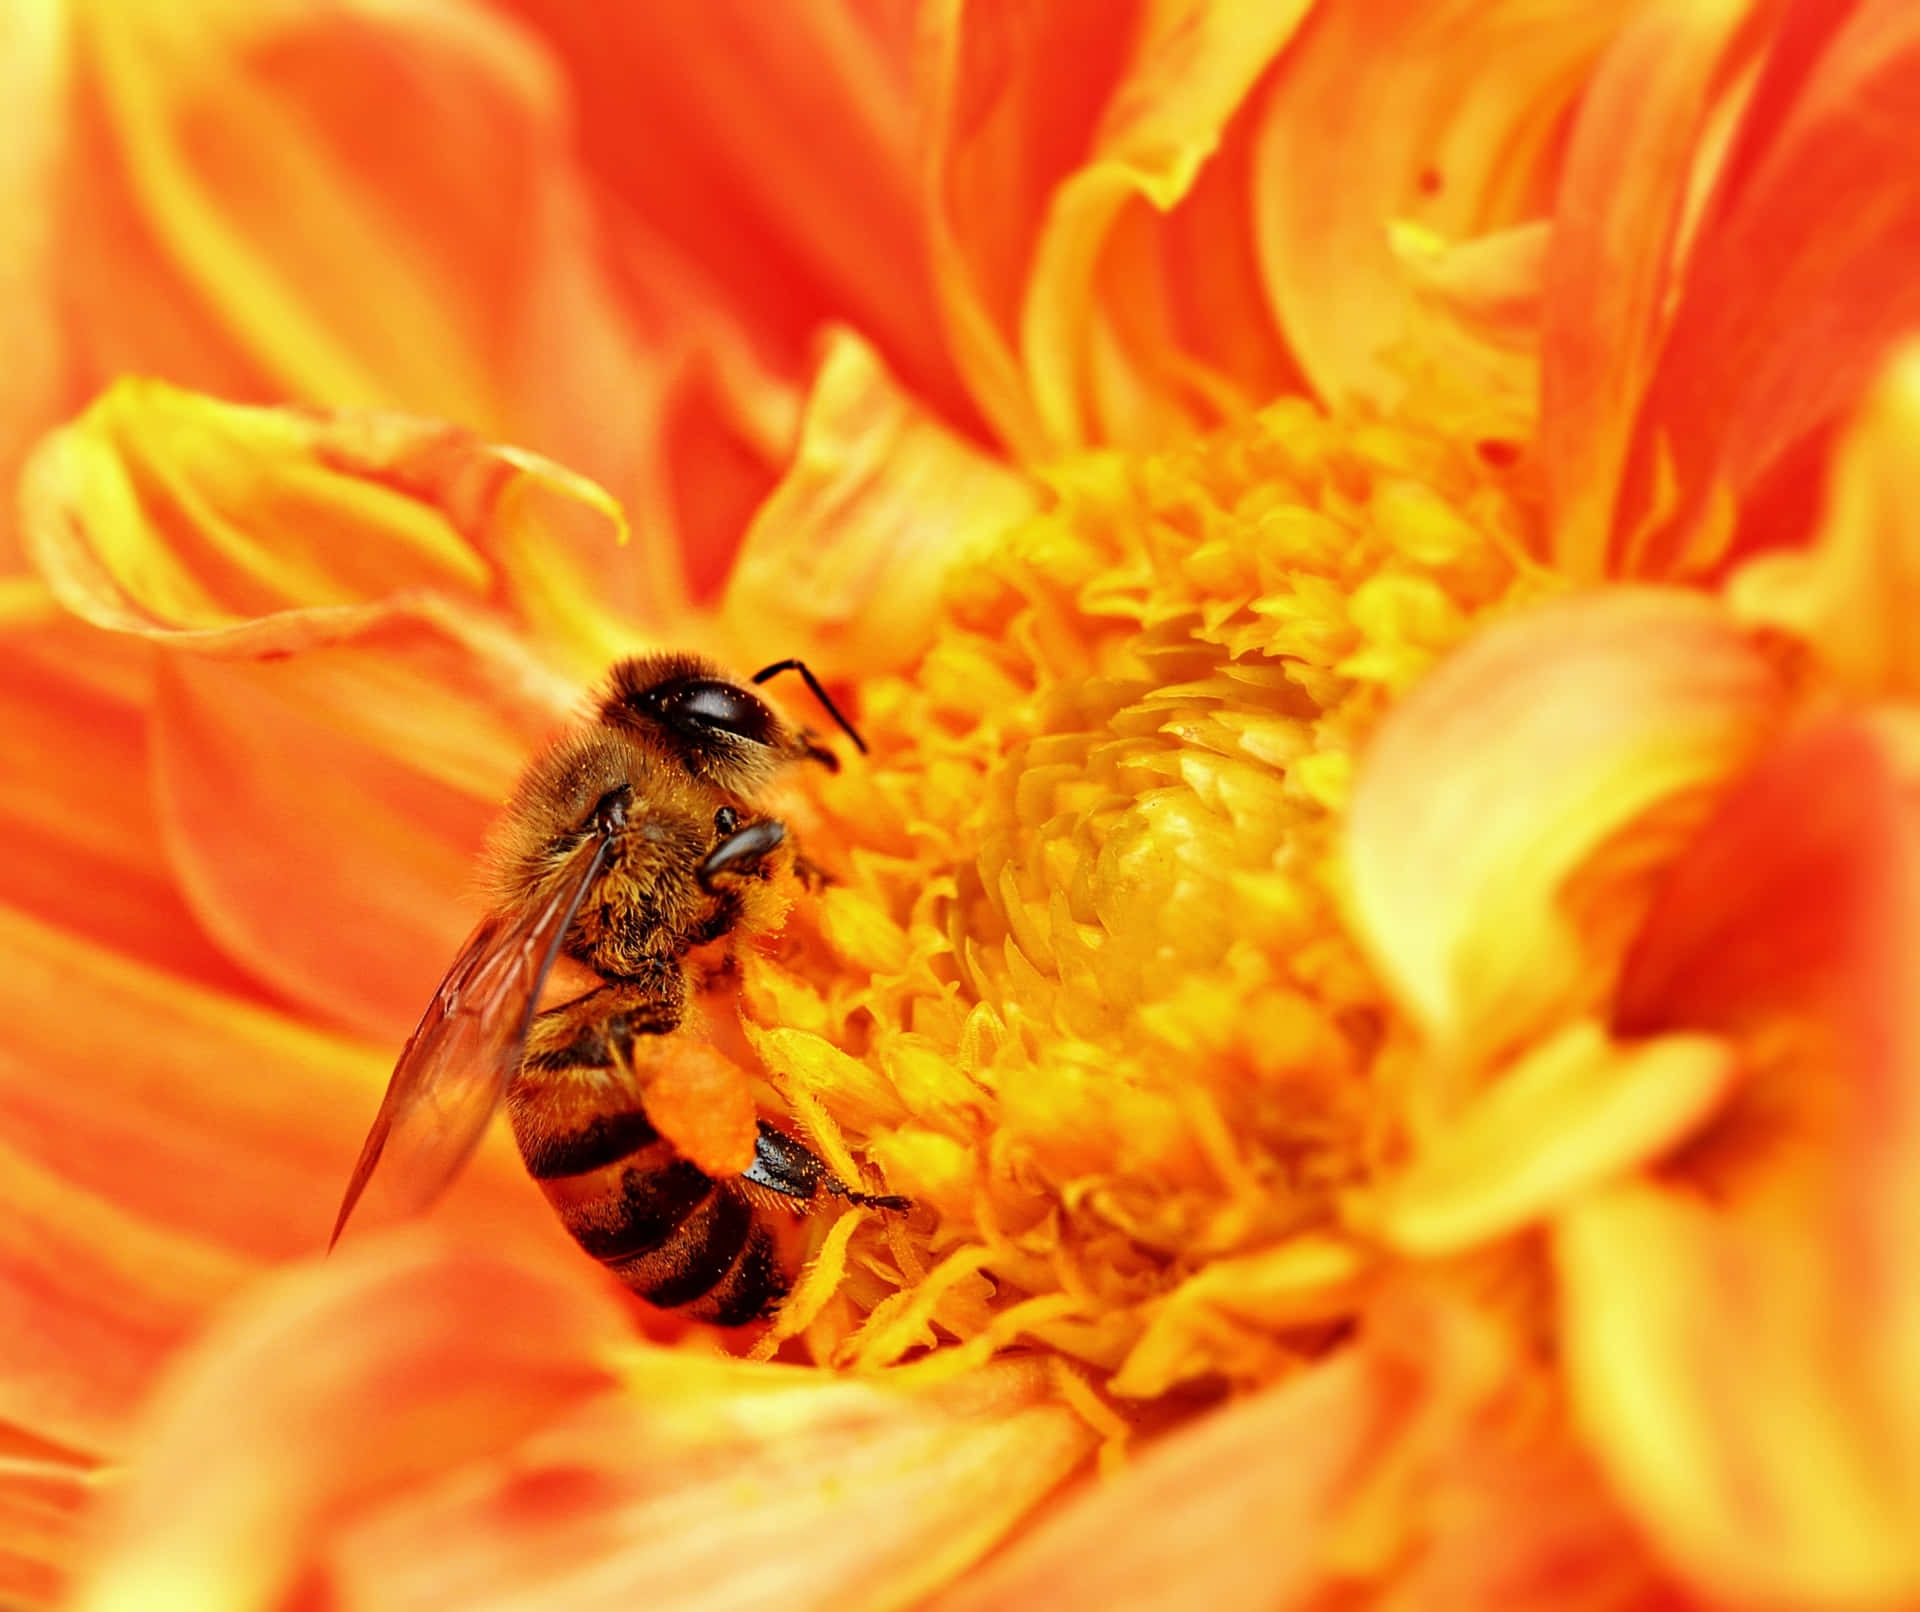 A honey bee foraging for nectar